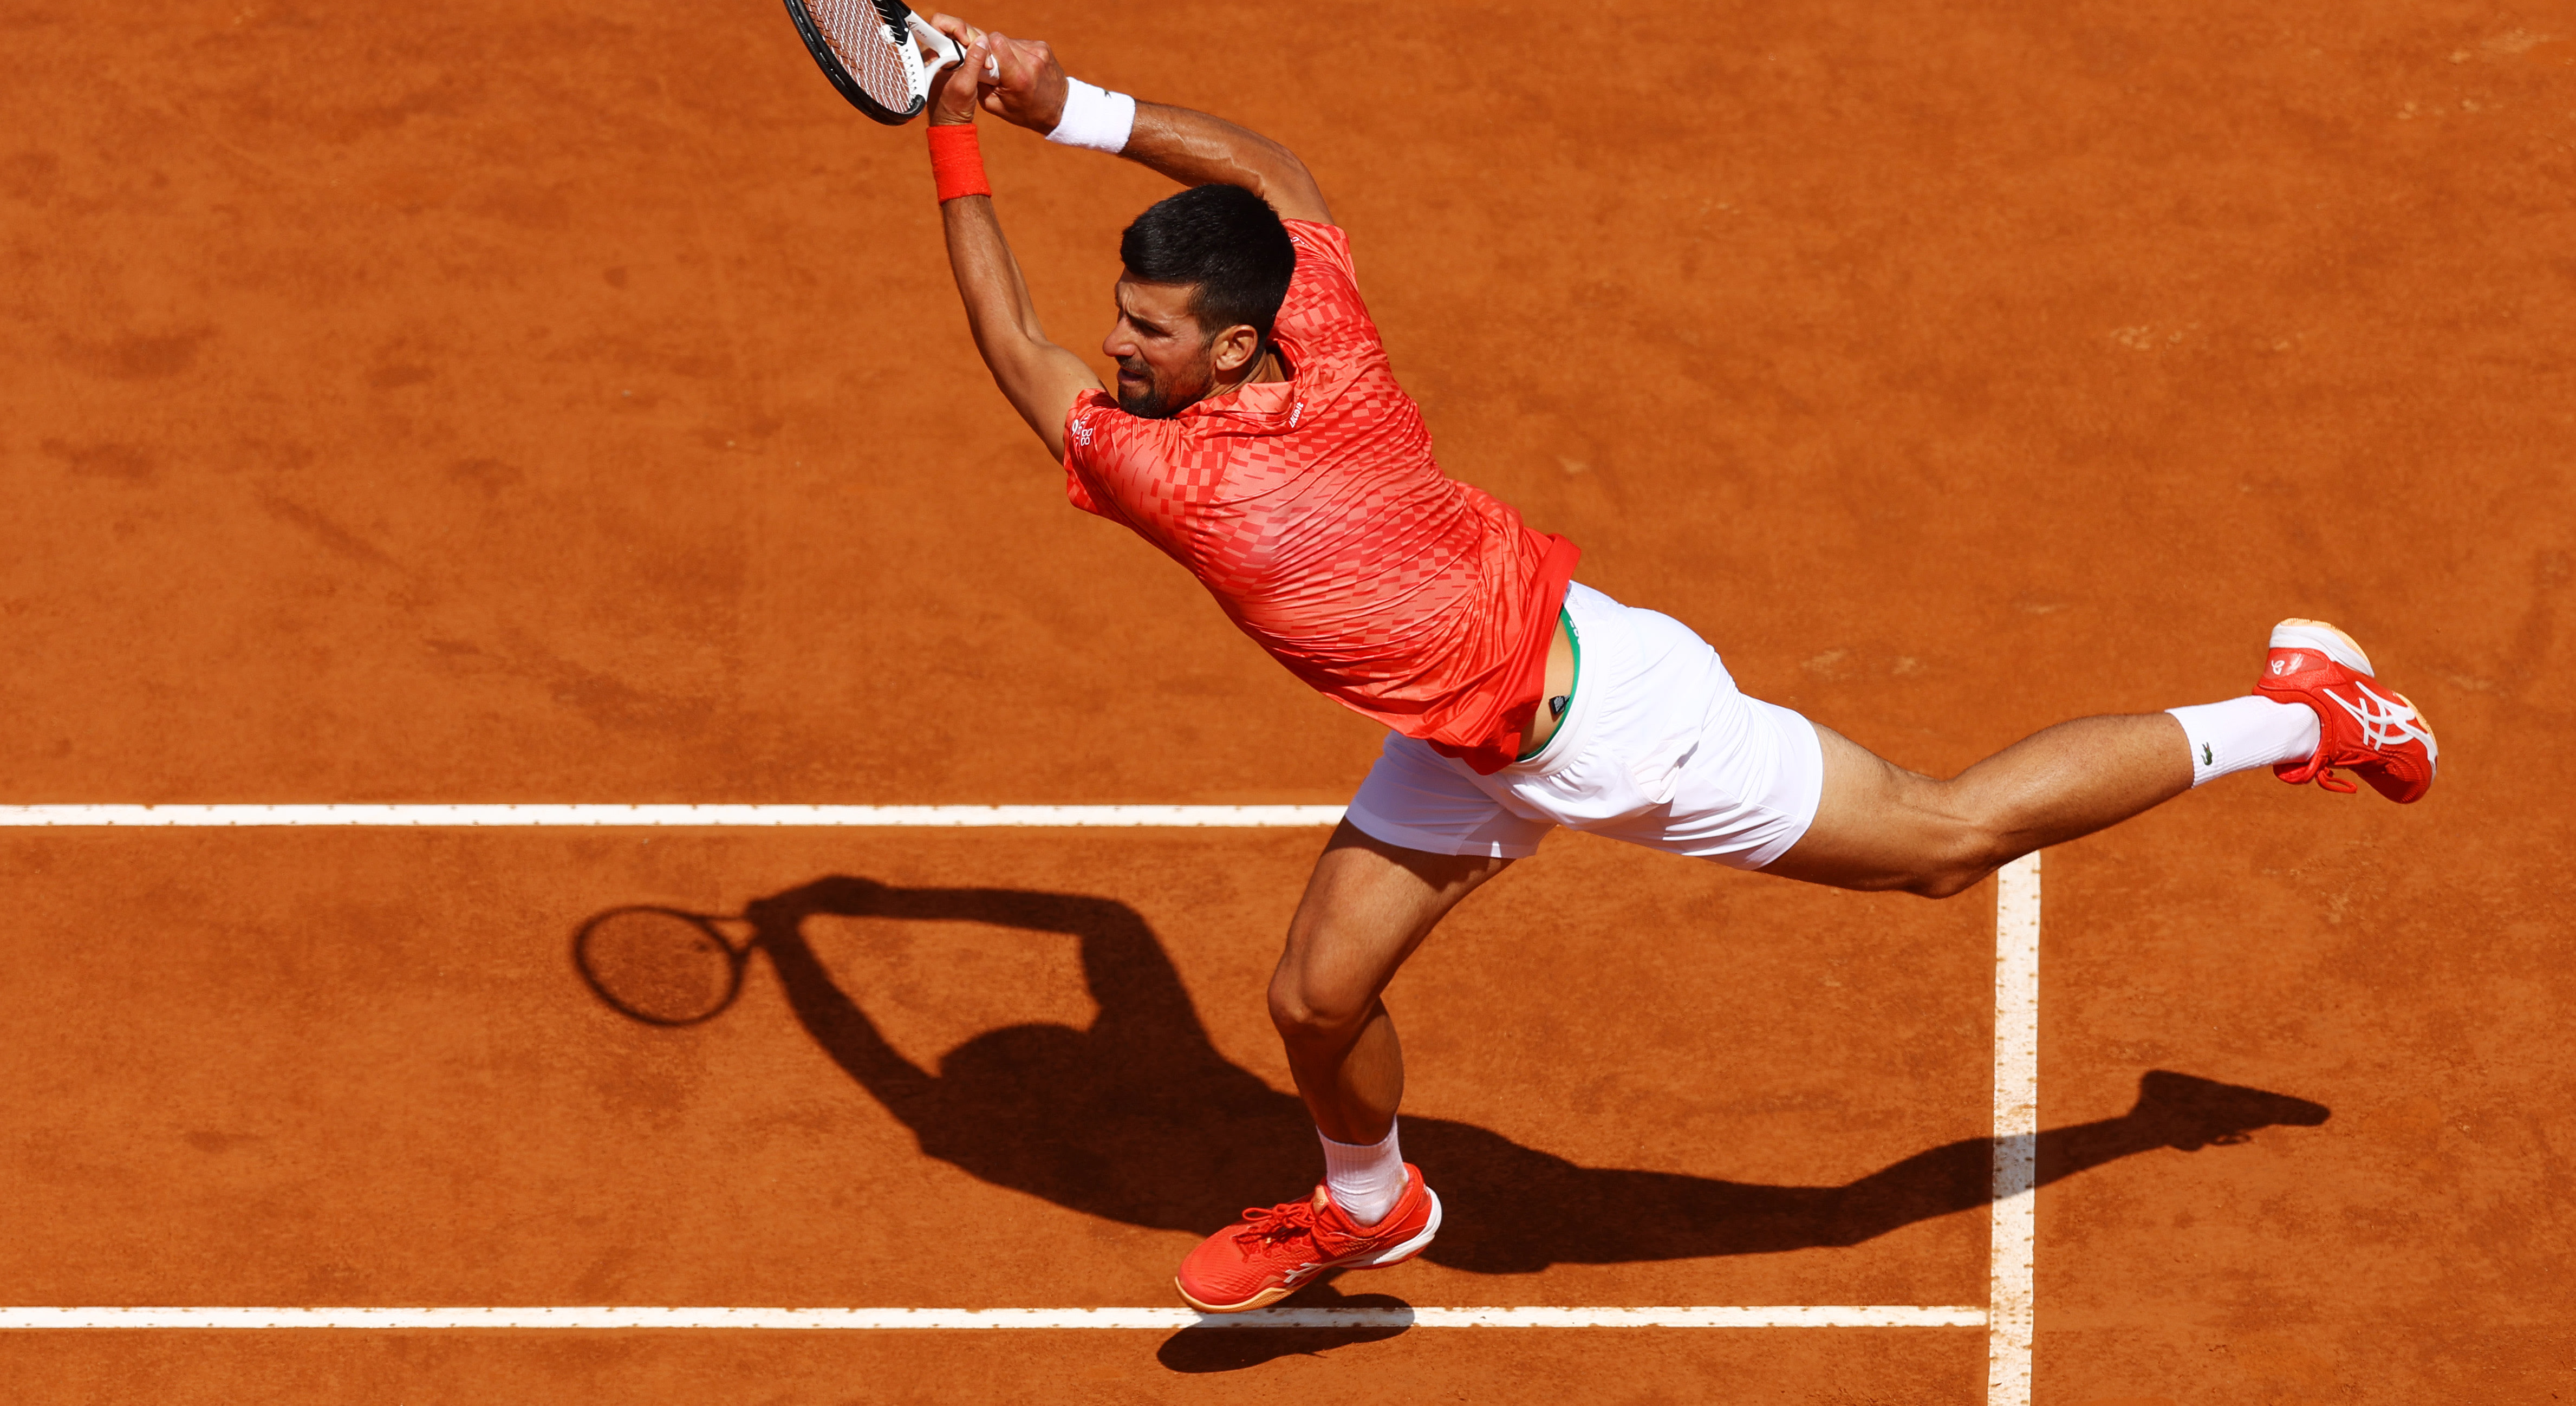 Stat of the Day Novak Djokovic records 1,050th win of career with victory over Dimitrov in Rome